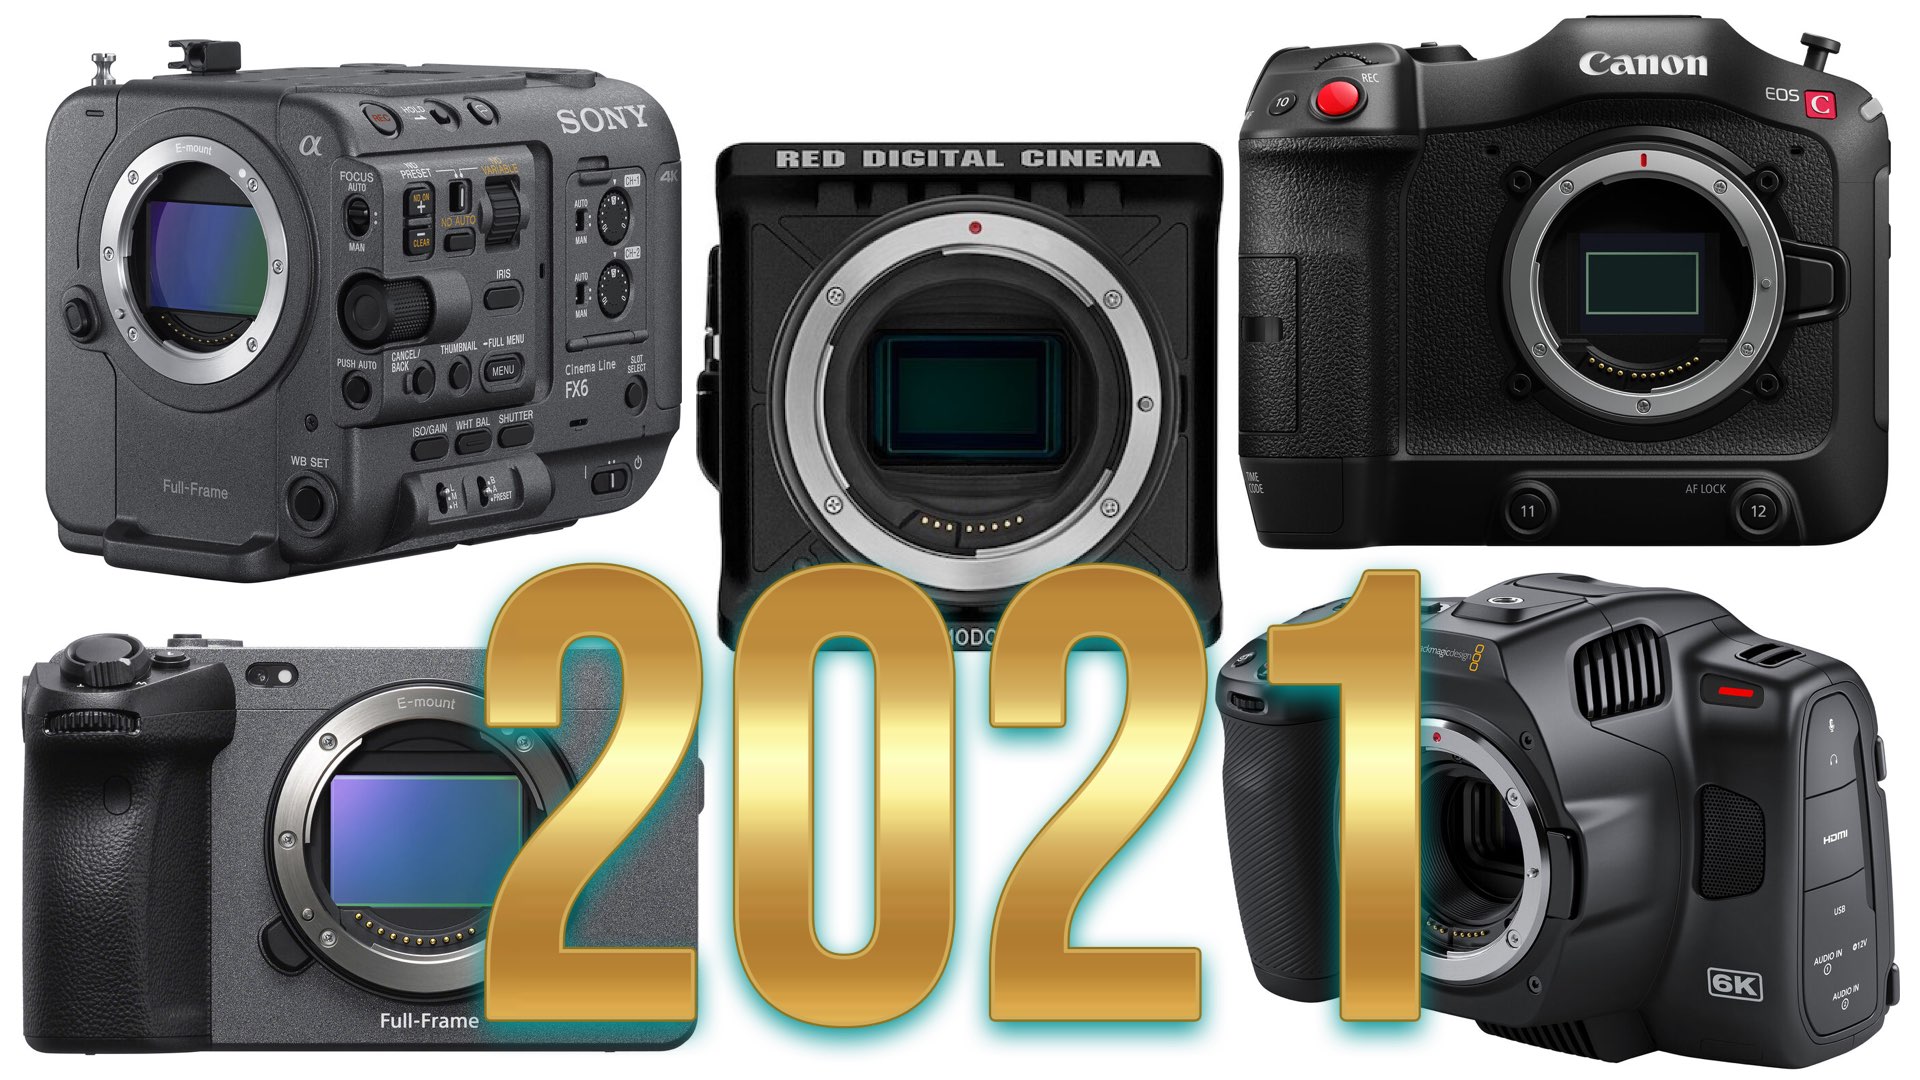 Top Rented Cameras for 2021: Canon EOS C70 Leads The Way